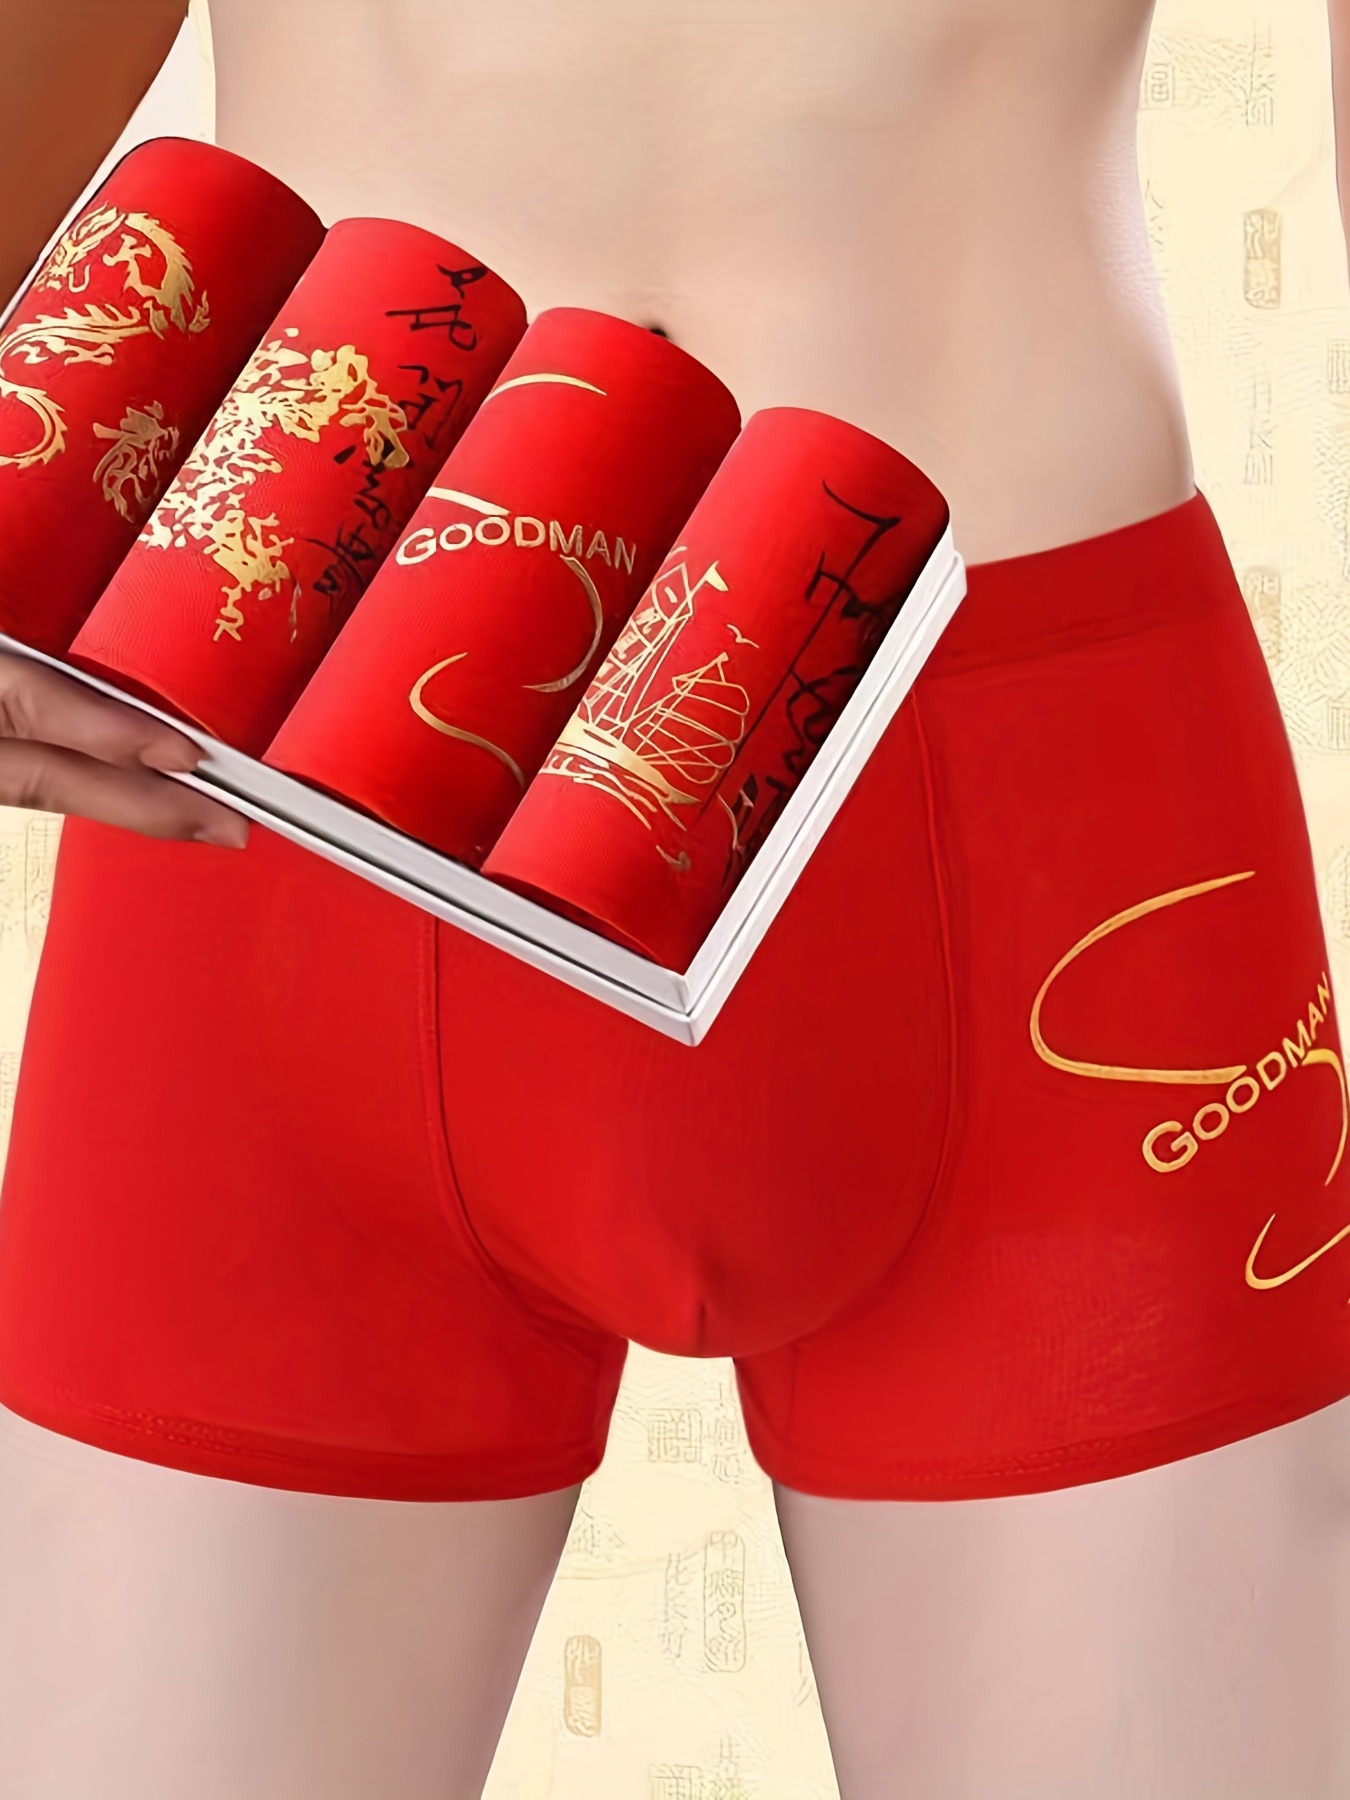 4pcs Men's Underwear Year Of The Dragon Lunar New Year Celebration Boxer  Briefs Shorts, Breathable Comfy High Stretch Boxer Trunks